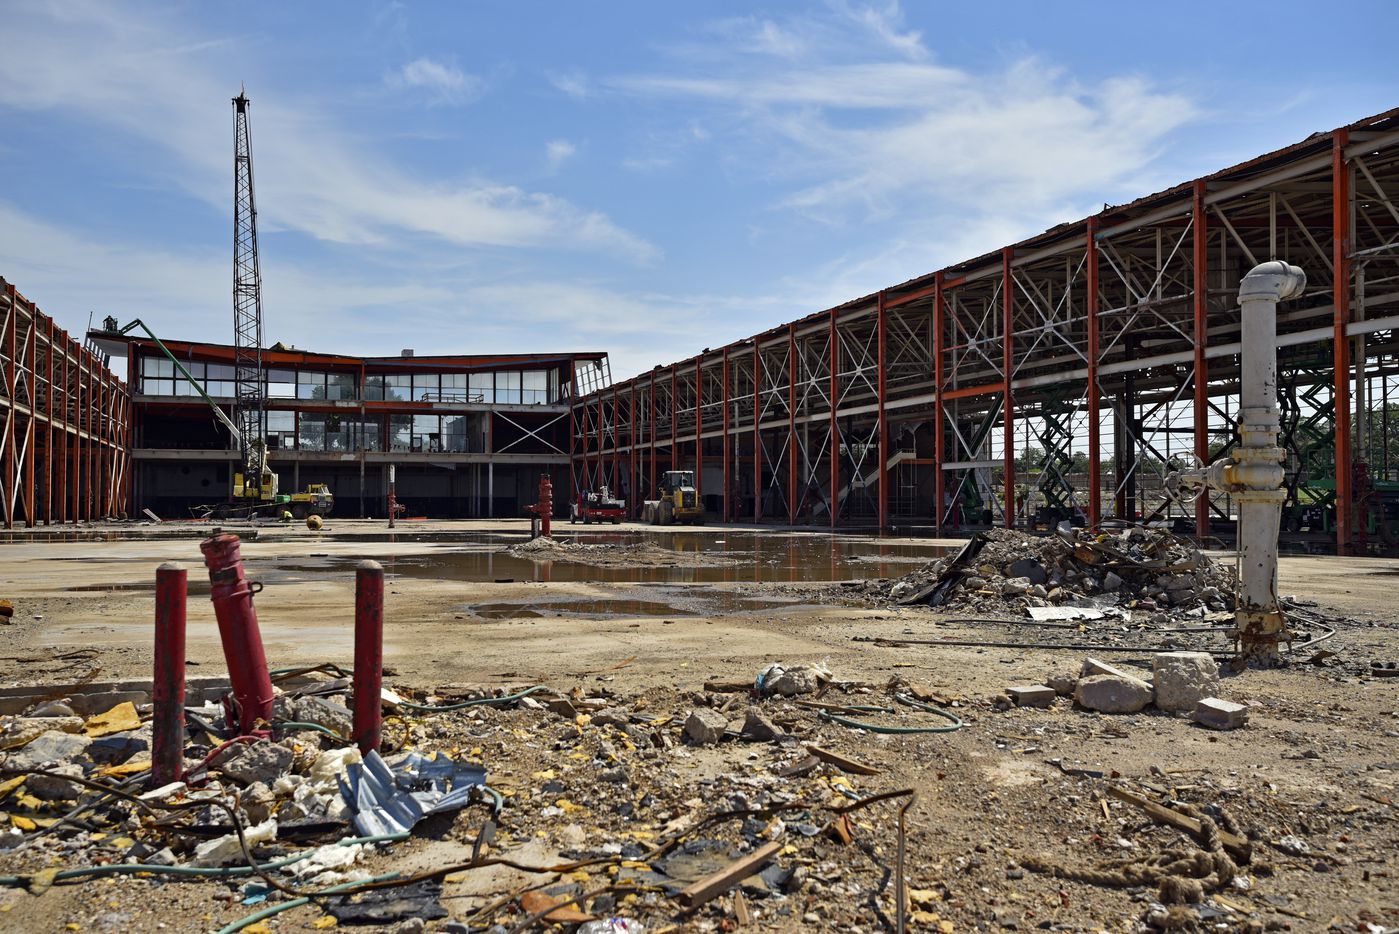 The center portion of the old Braniff base at Dallas Love Field has been demolished to make...